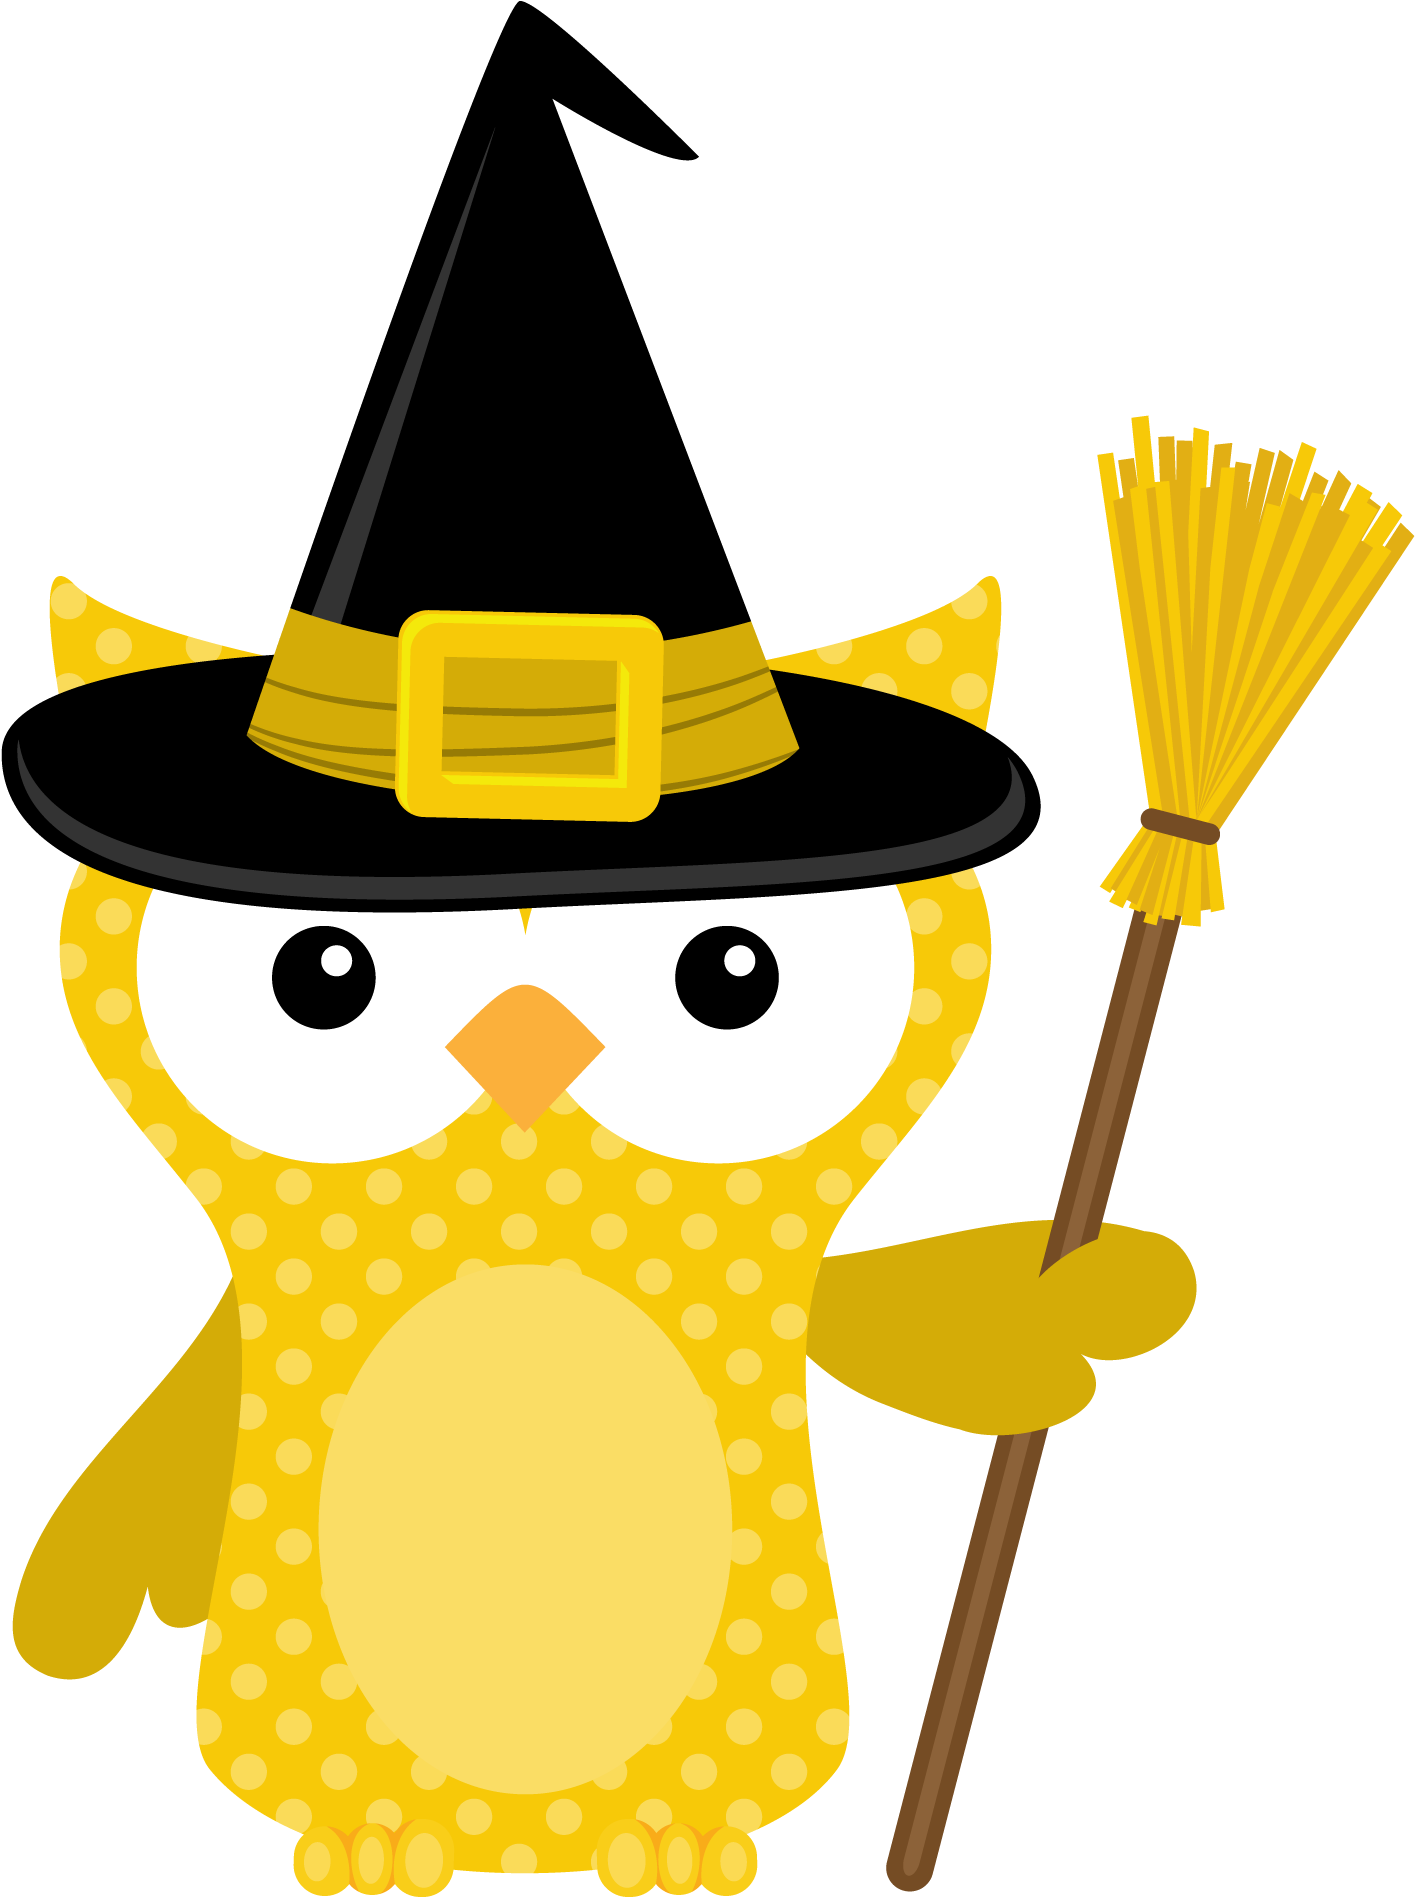 The Cutest Owl For A Spooky Party - Clip Art (1950x1950)